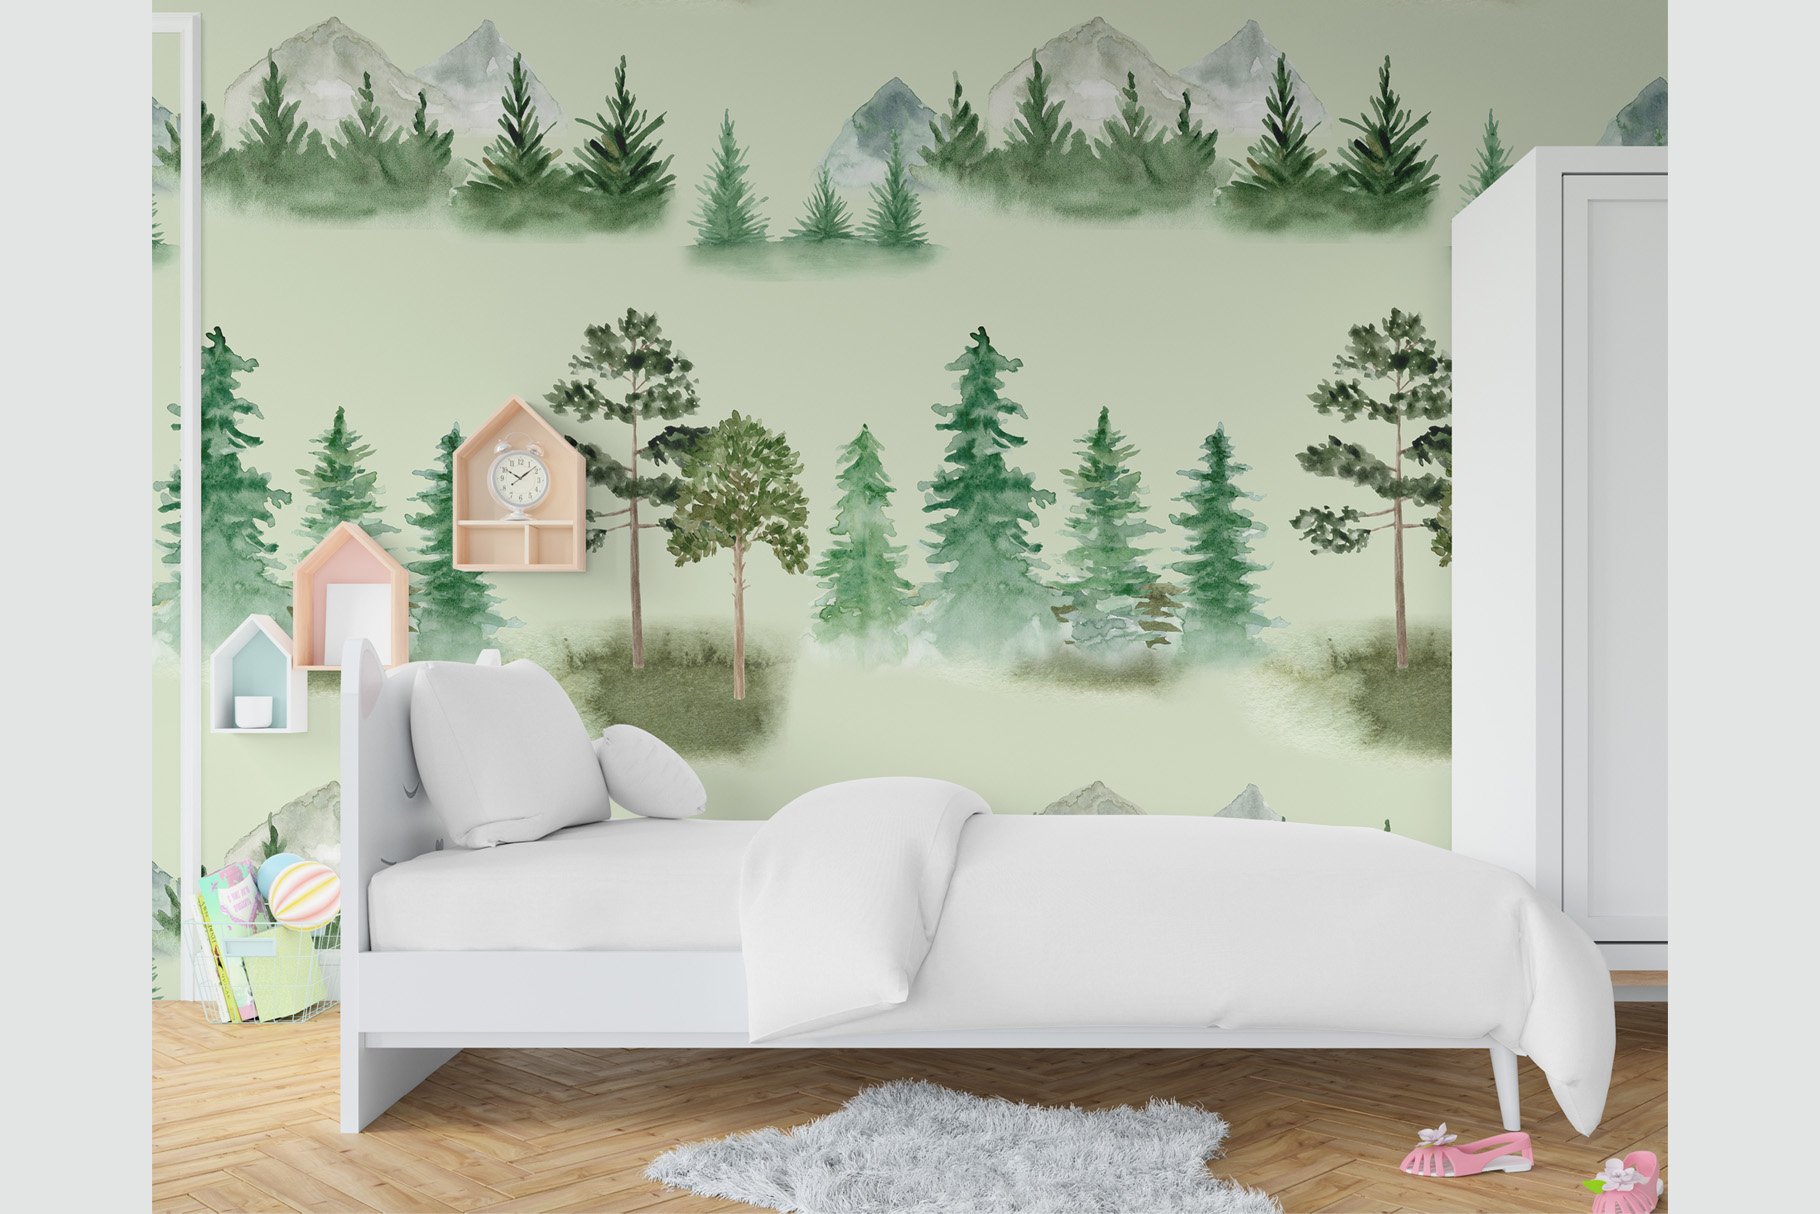 Bedroom with a wall mural of trees and mountains.